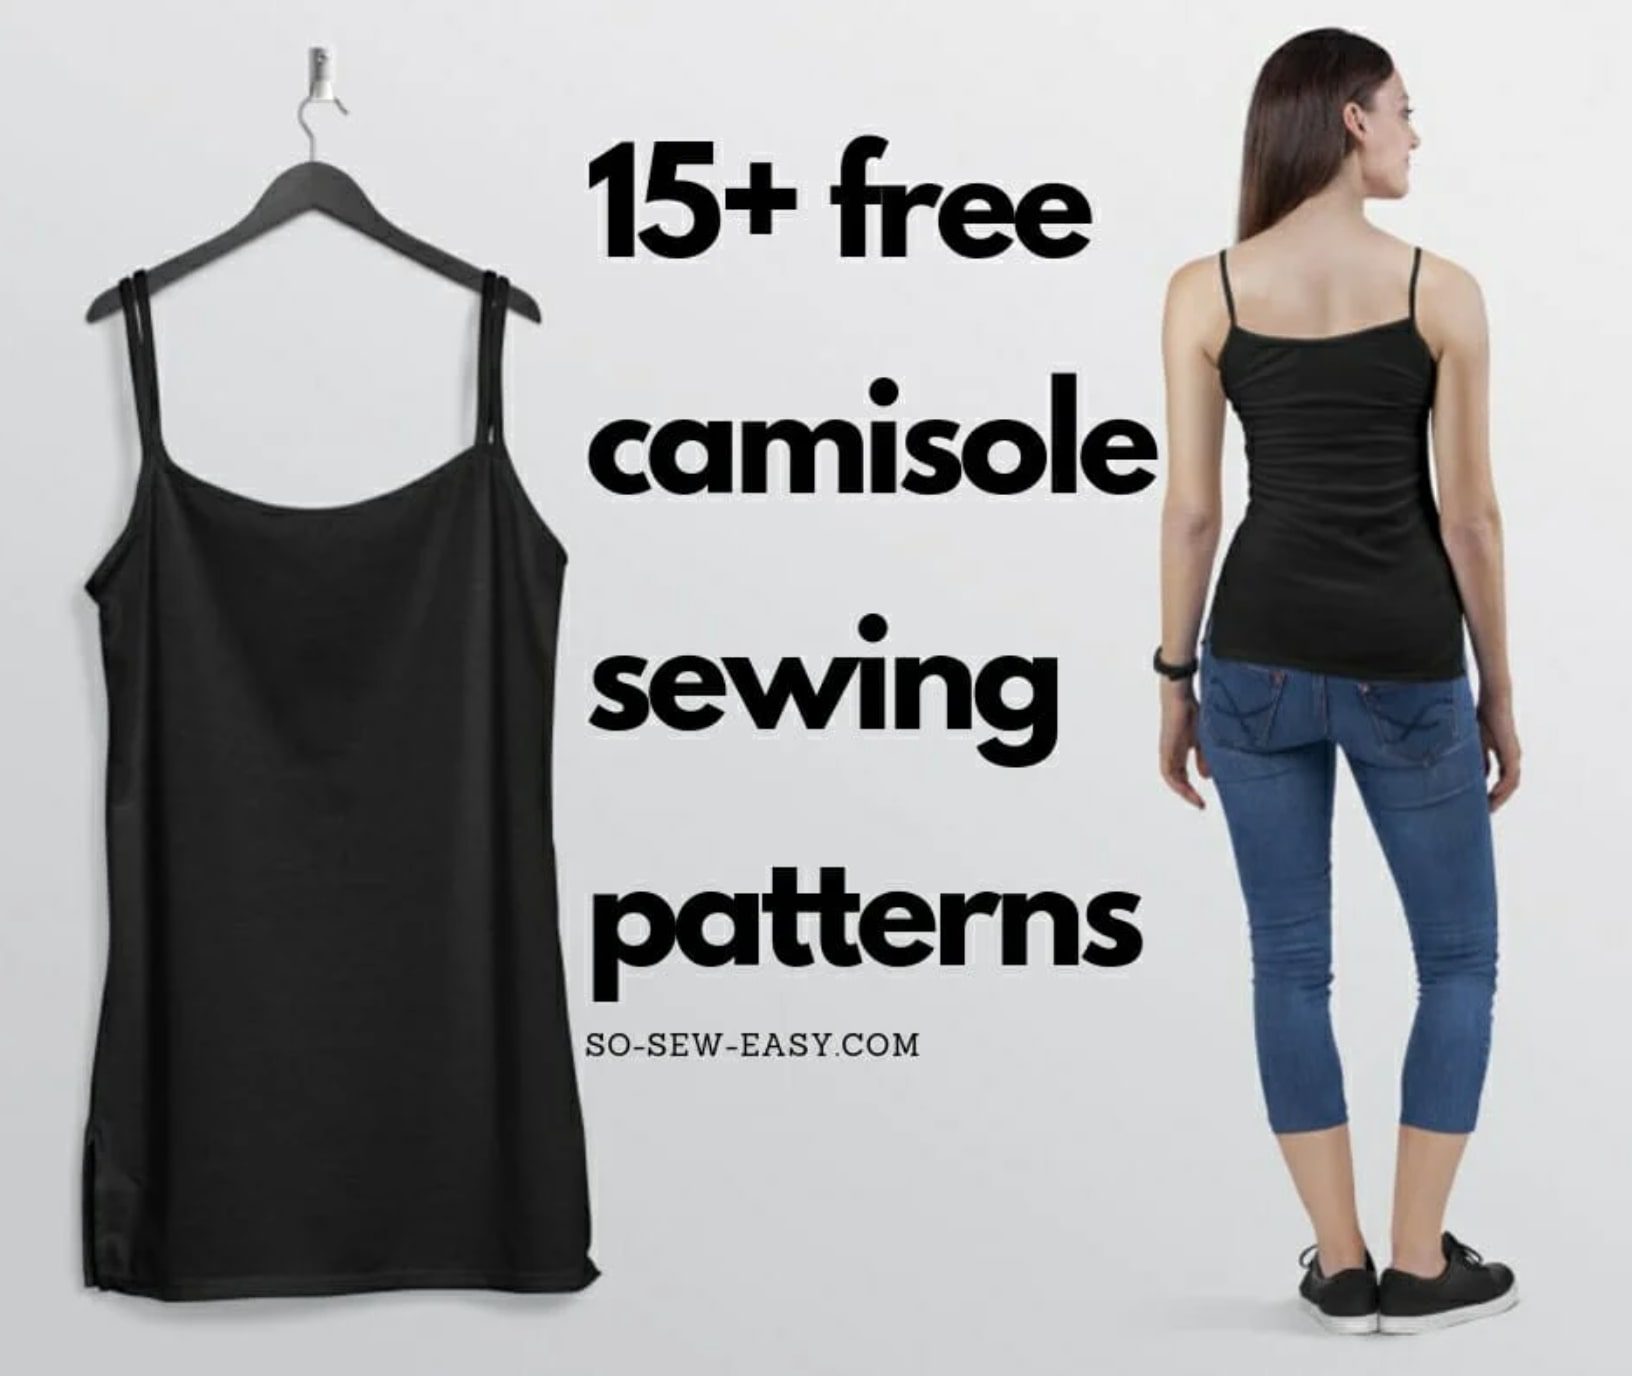 15+ FREE Camisole Sewing Patterns | Sewing 4 Free